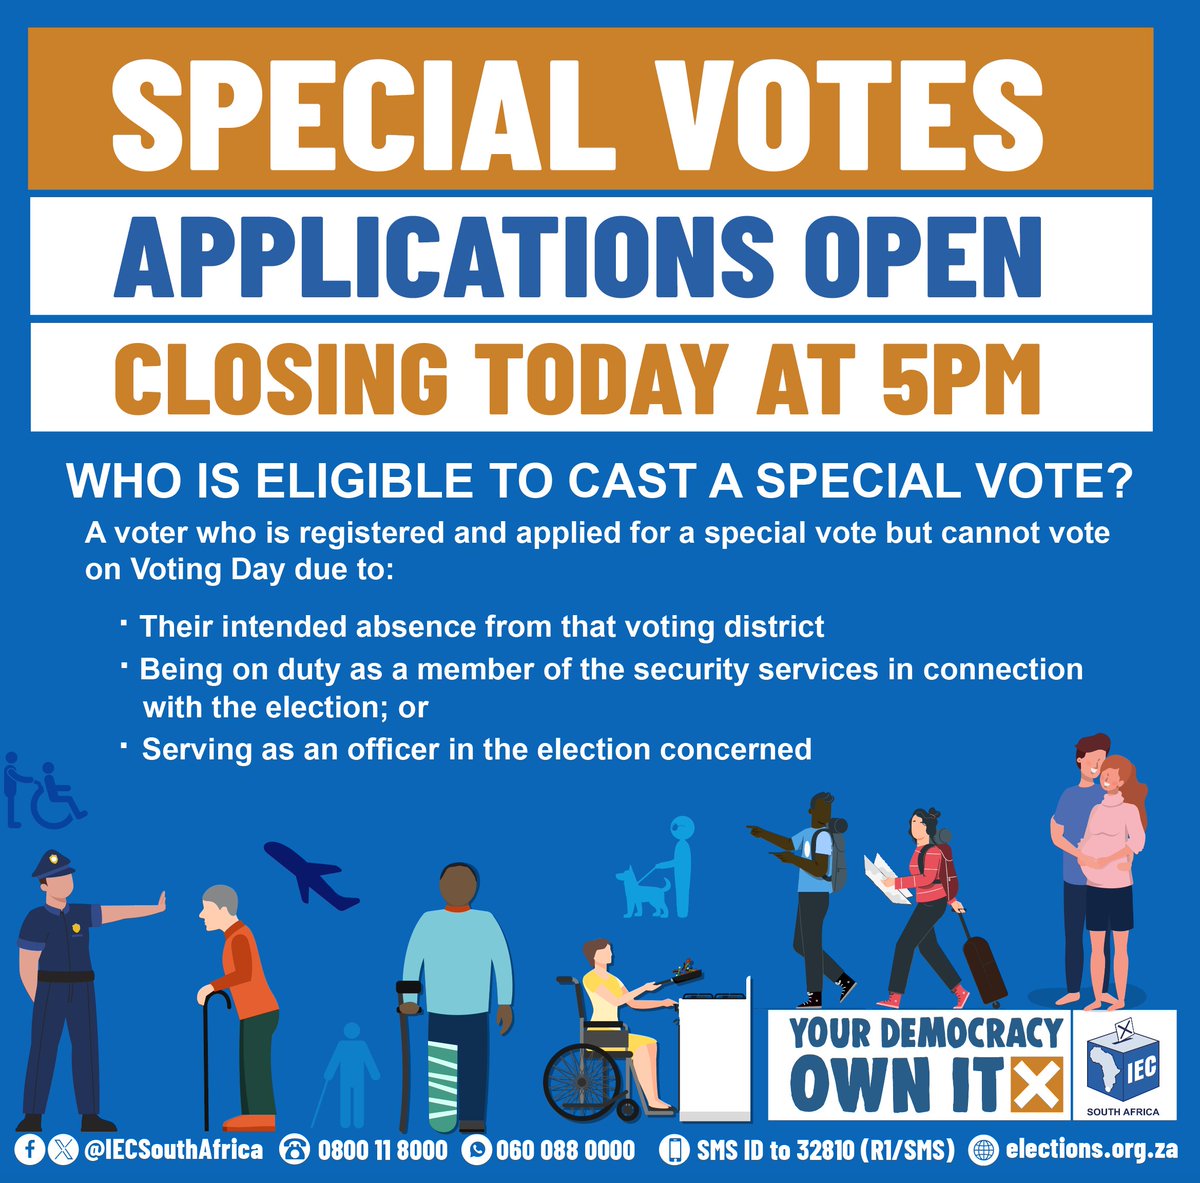 🕛 Deadline Extended! Due to high demand, we've extended the special vote application deadline to midnight at 23:59. This is your last chance to apply, so don't miss out! Apply online at bit.ly/3QsLUax or send your ID via SMS to 32249 (R1/SMS). #SpecialVote #FinalCall…